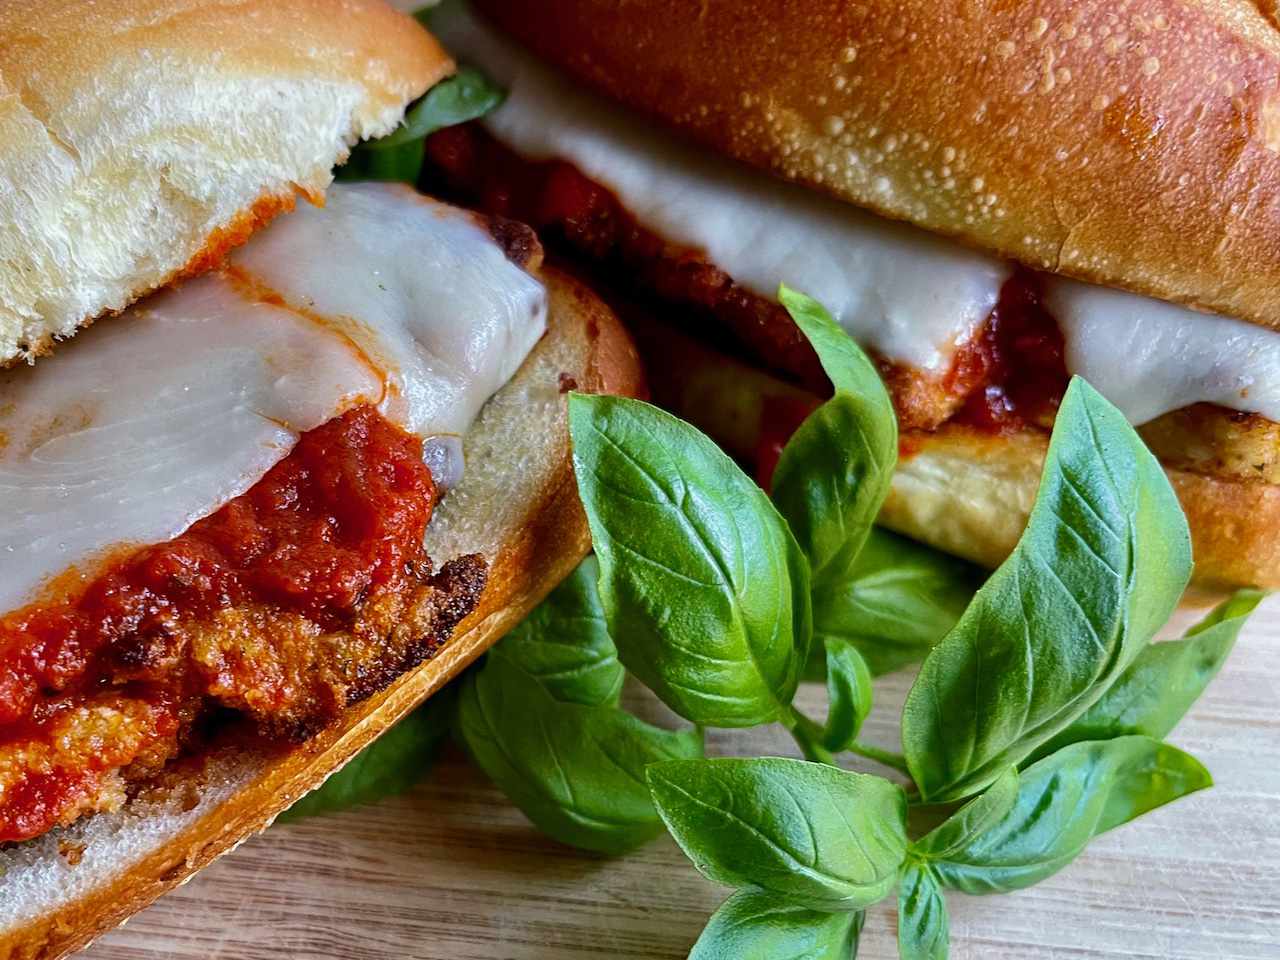 A chicken Parm cutlet on a roll garnished with basil